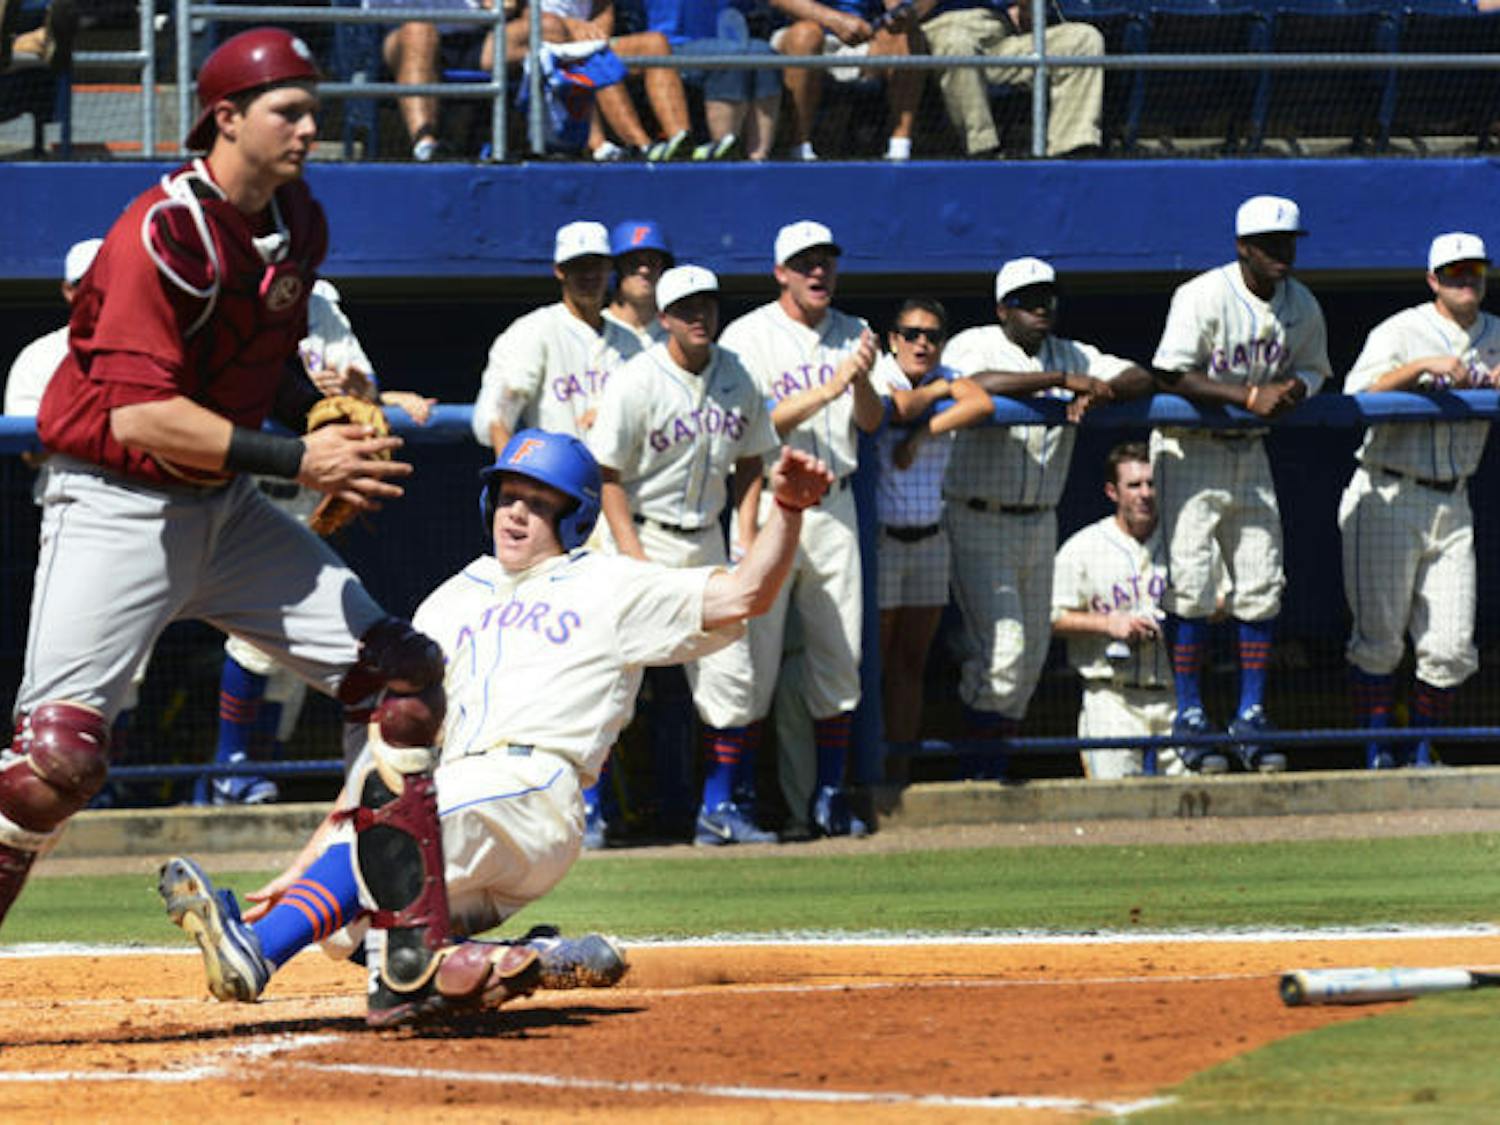 Freshman outfielder Harrison Bader slides into home during Florida's 14-5 win against South Carolina on Saturday. Bader scored a run in the Gators' 7-1 win against the Owls on Tuesday.